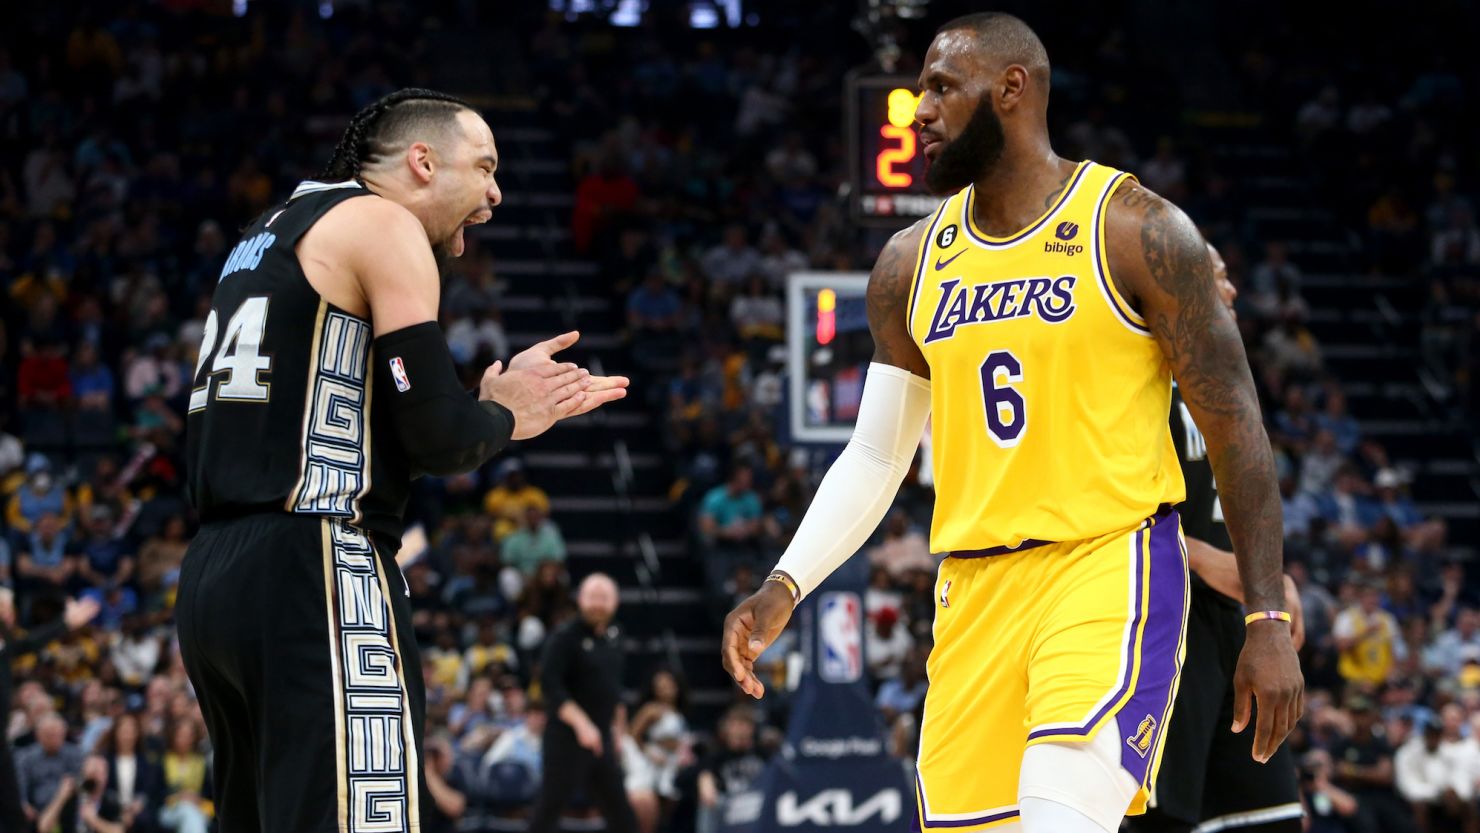 Memphis Grizzlies forward Dillon Brooks shouts toward Los Angeles Lakers forward LeBron James during the second half of Game 2.